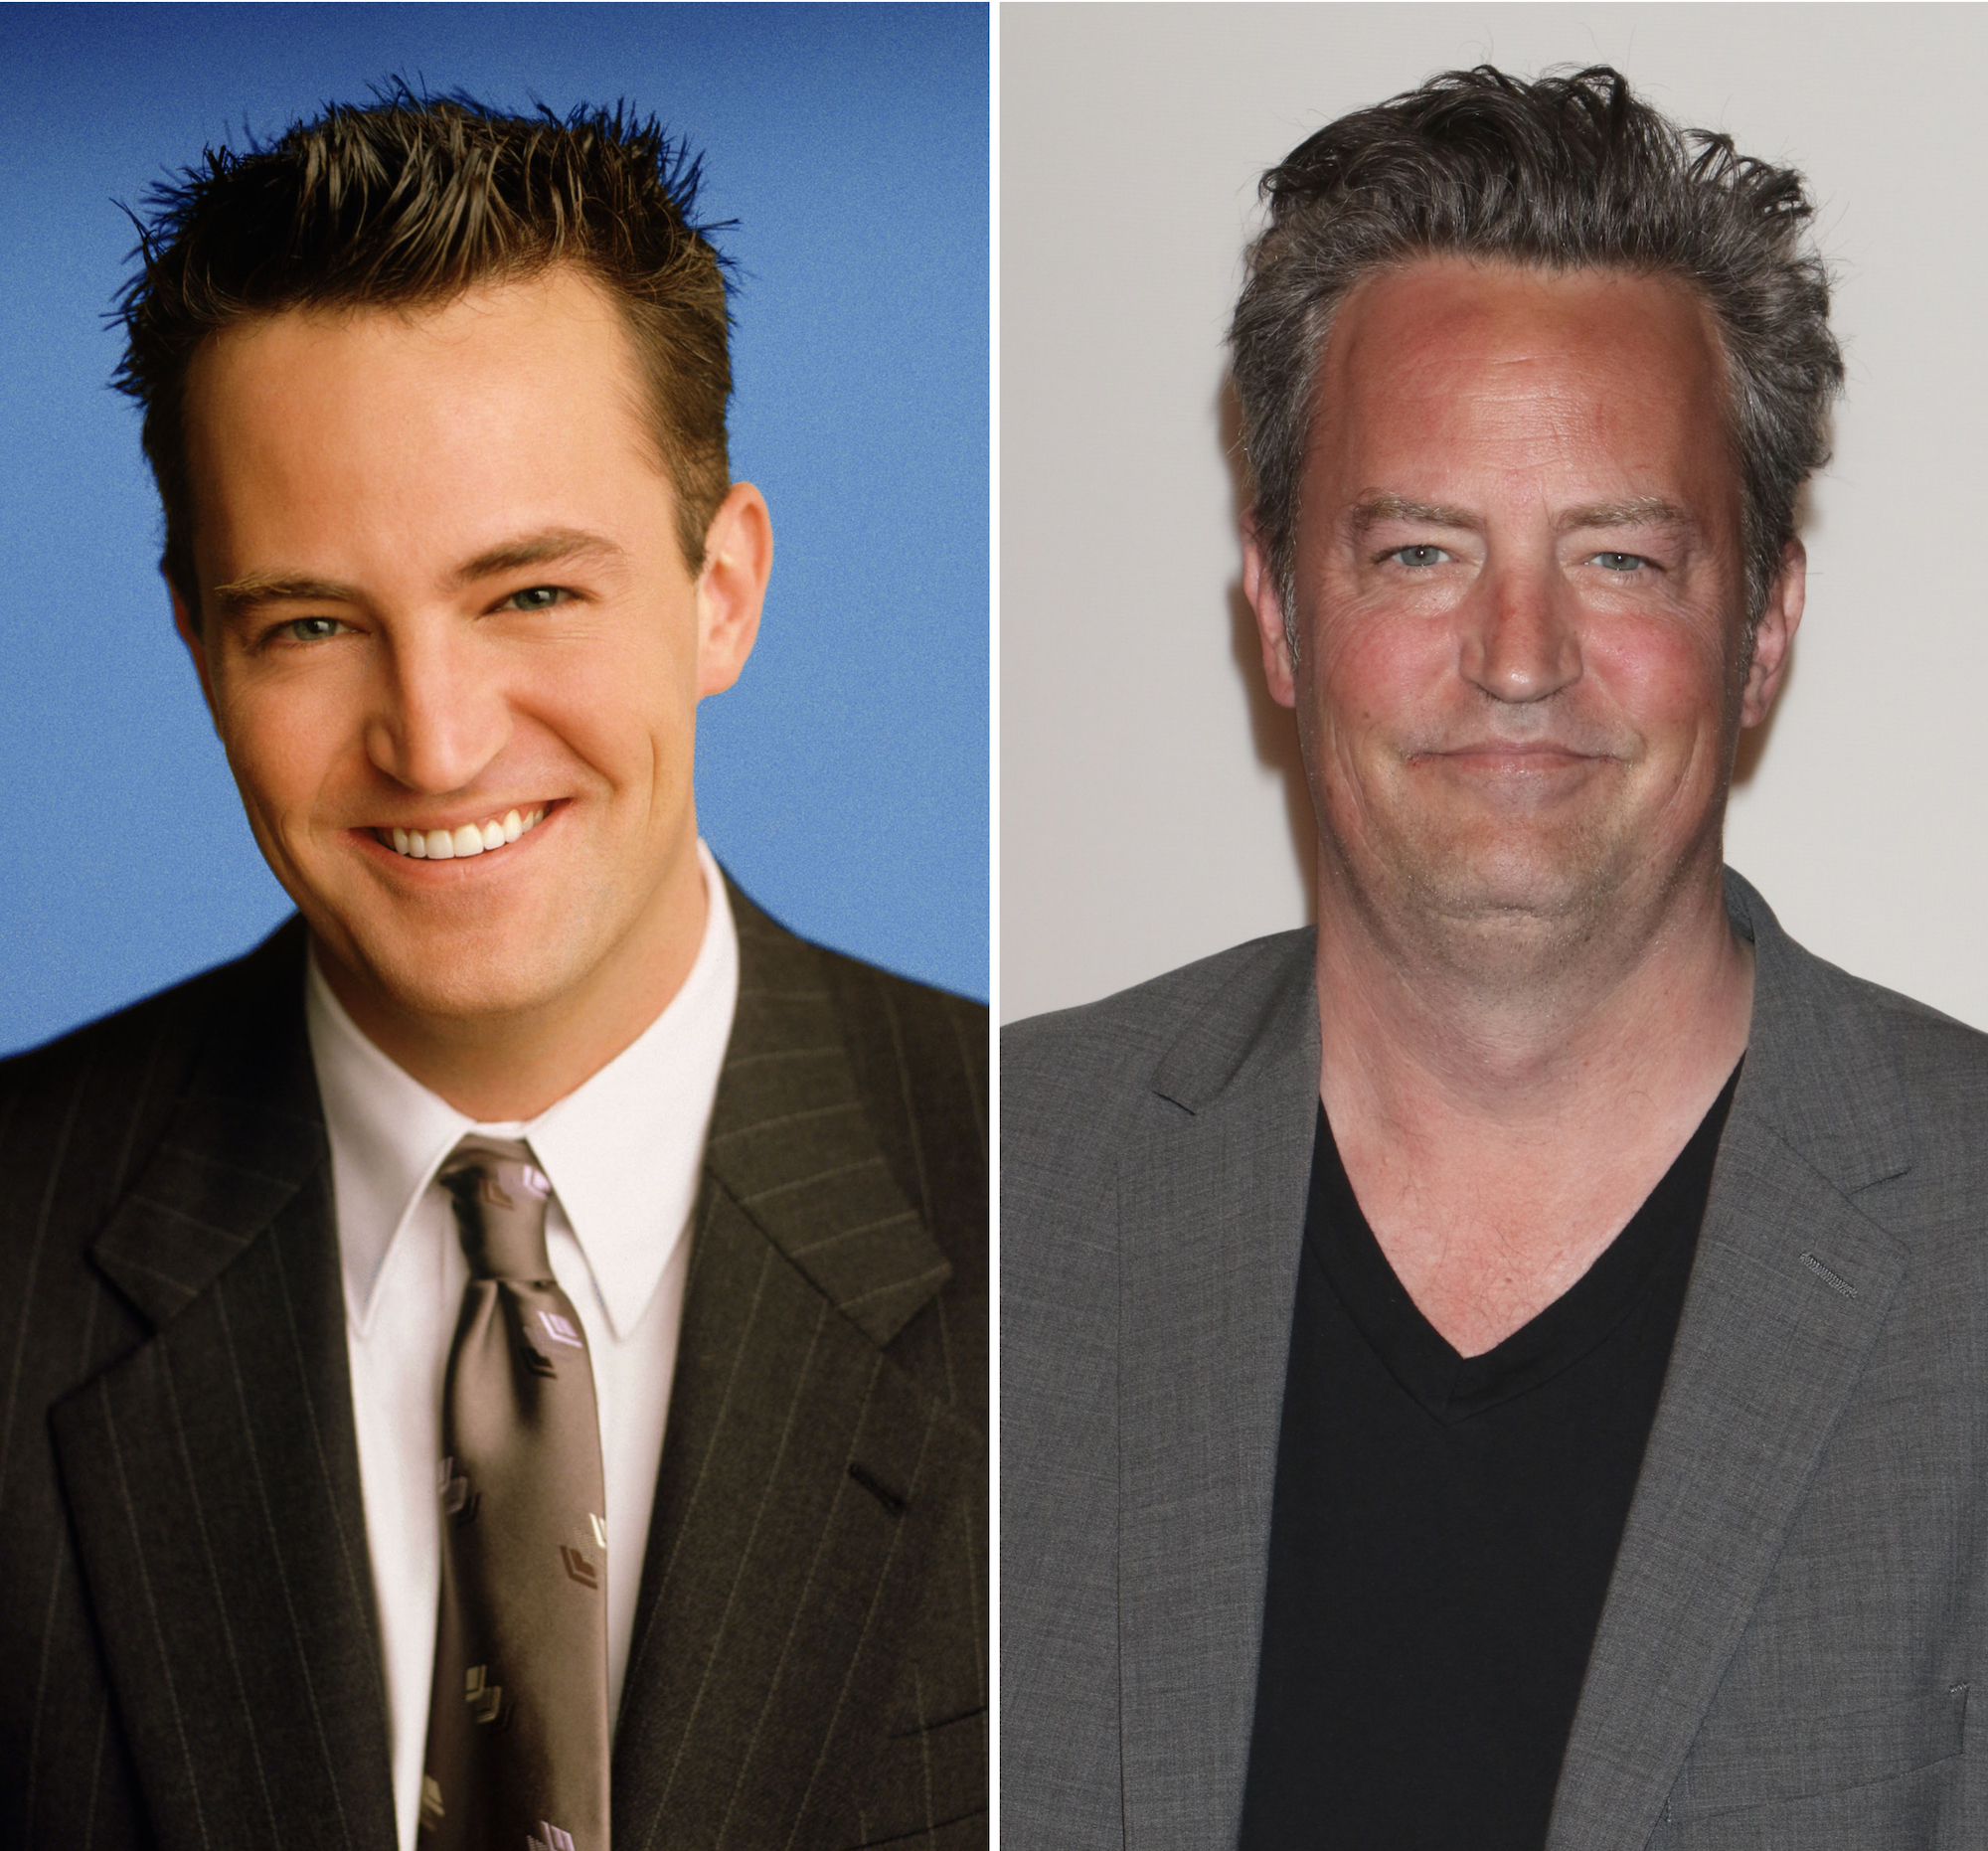 https://www.usmagazine.com/wp-content/uploads/2020/09/Friends-Where-Are-They-Now-Matthew-Perry.jpg?quality=82&strip=all